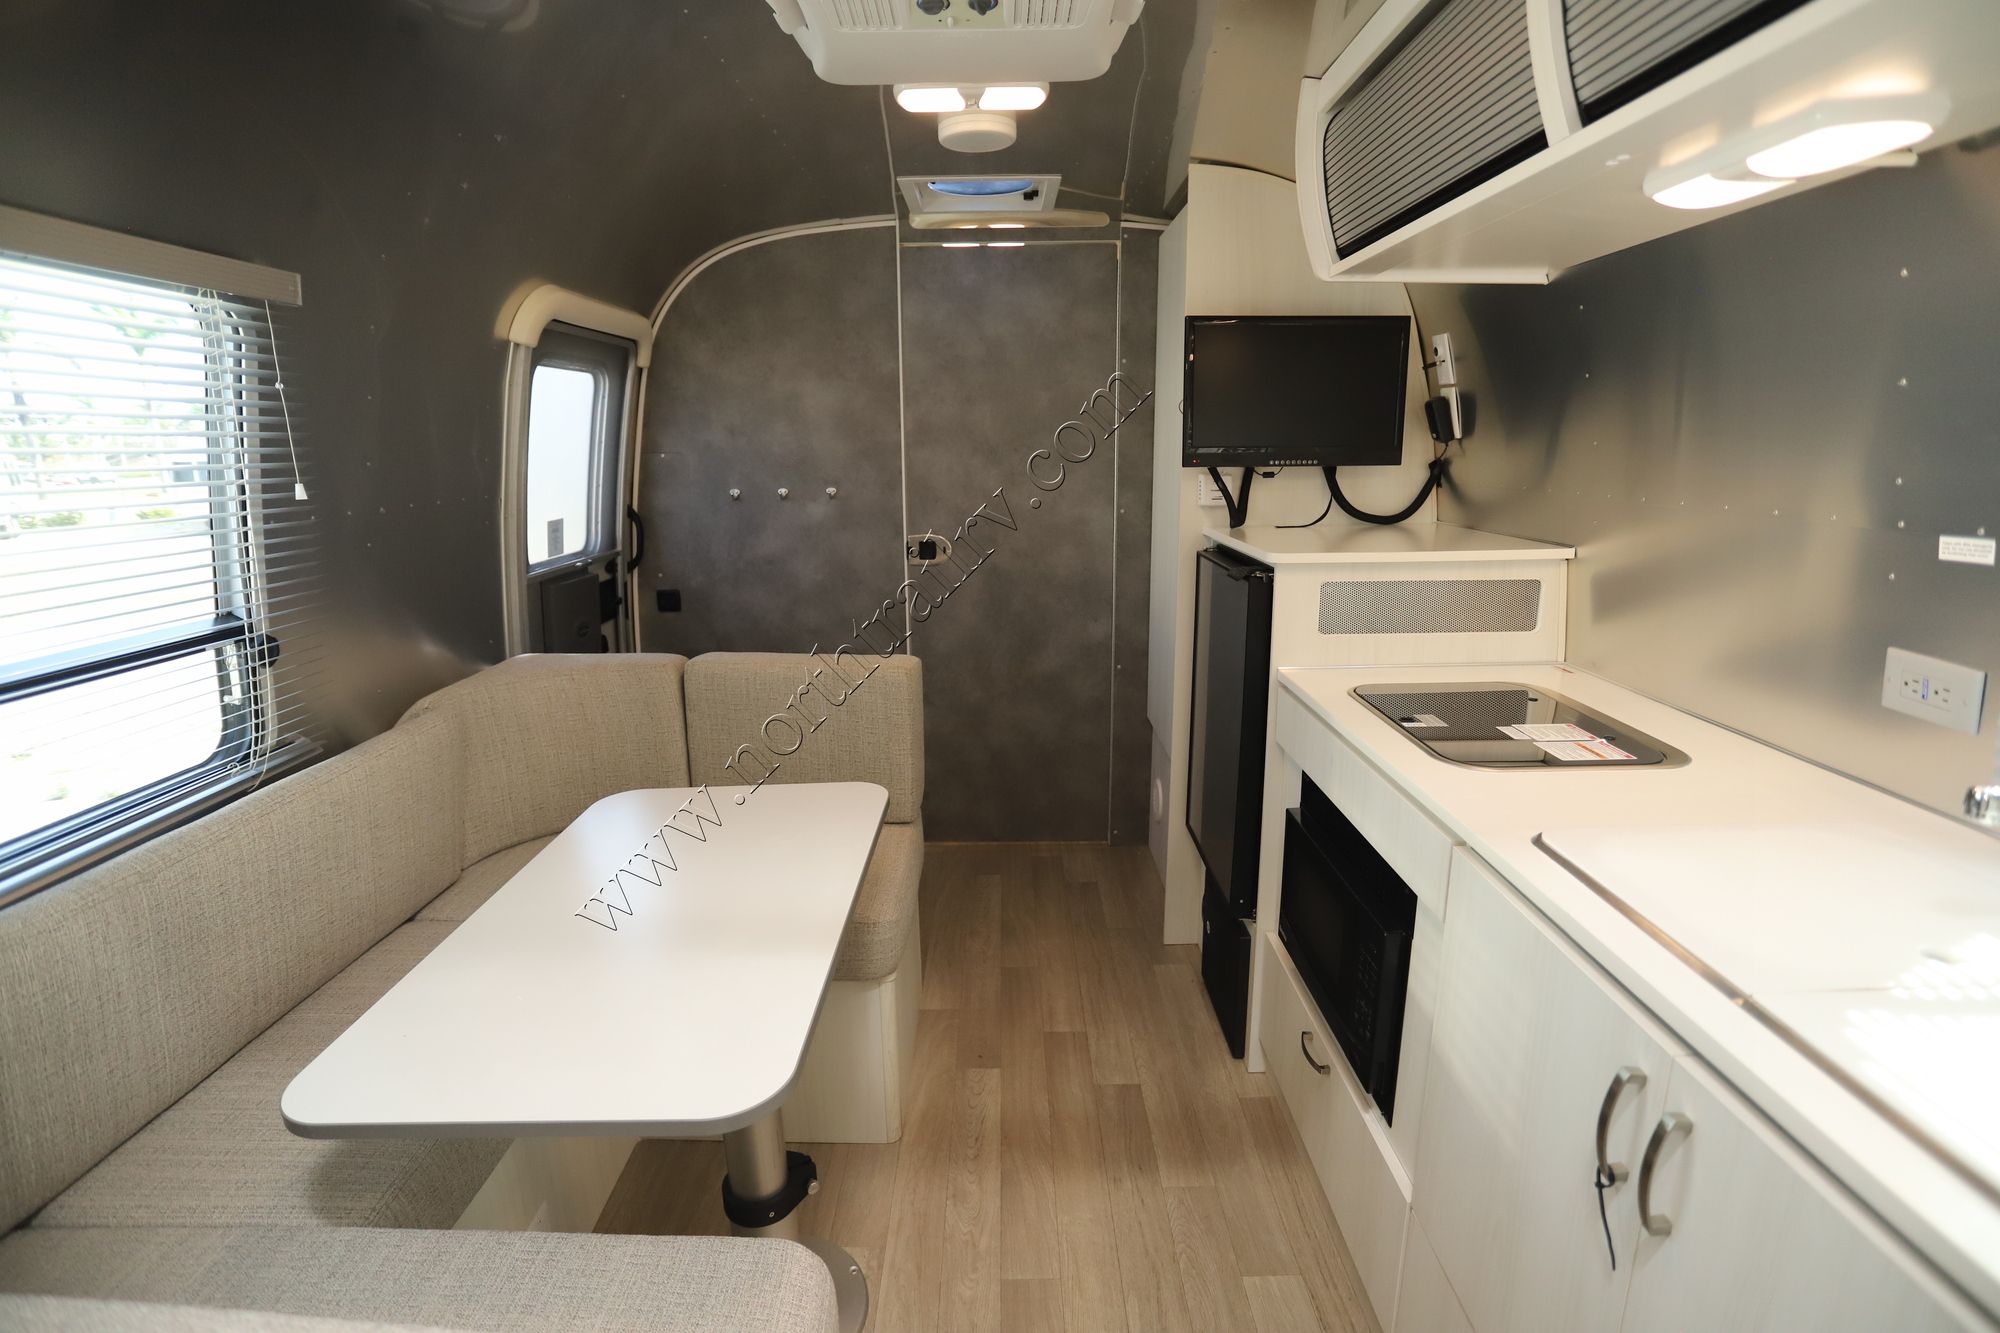 Used 2020 Airstream Bambi 22FB Travel Trailer  For Sale